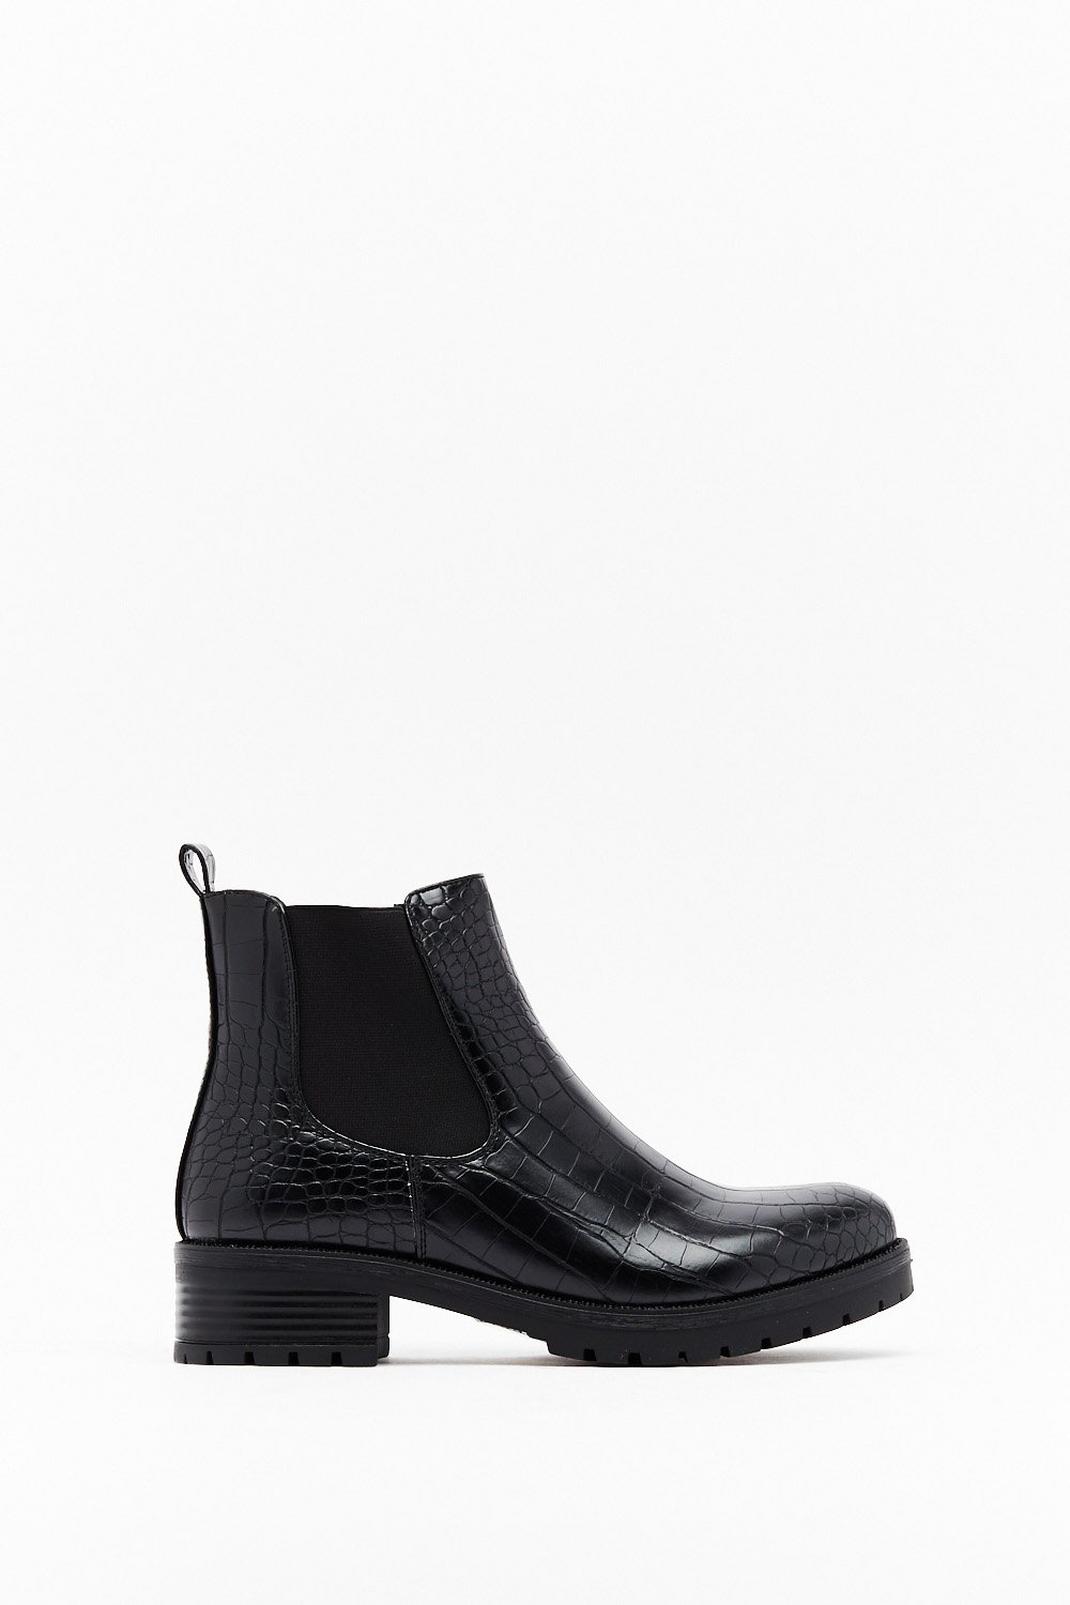 Don't Croc the Boat Faux Leather Chelsea Boots